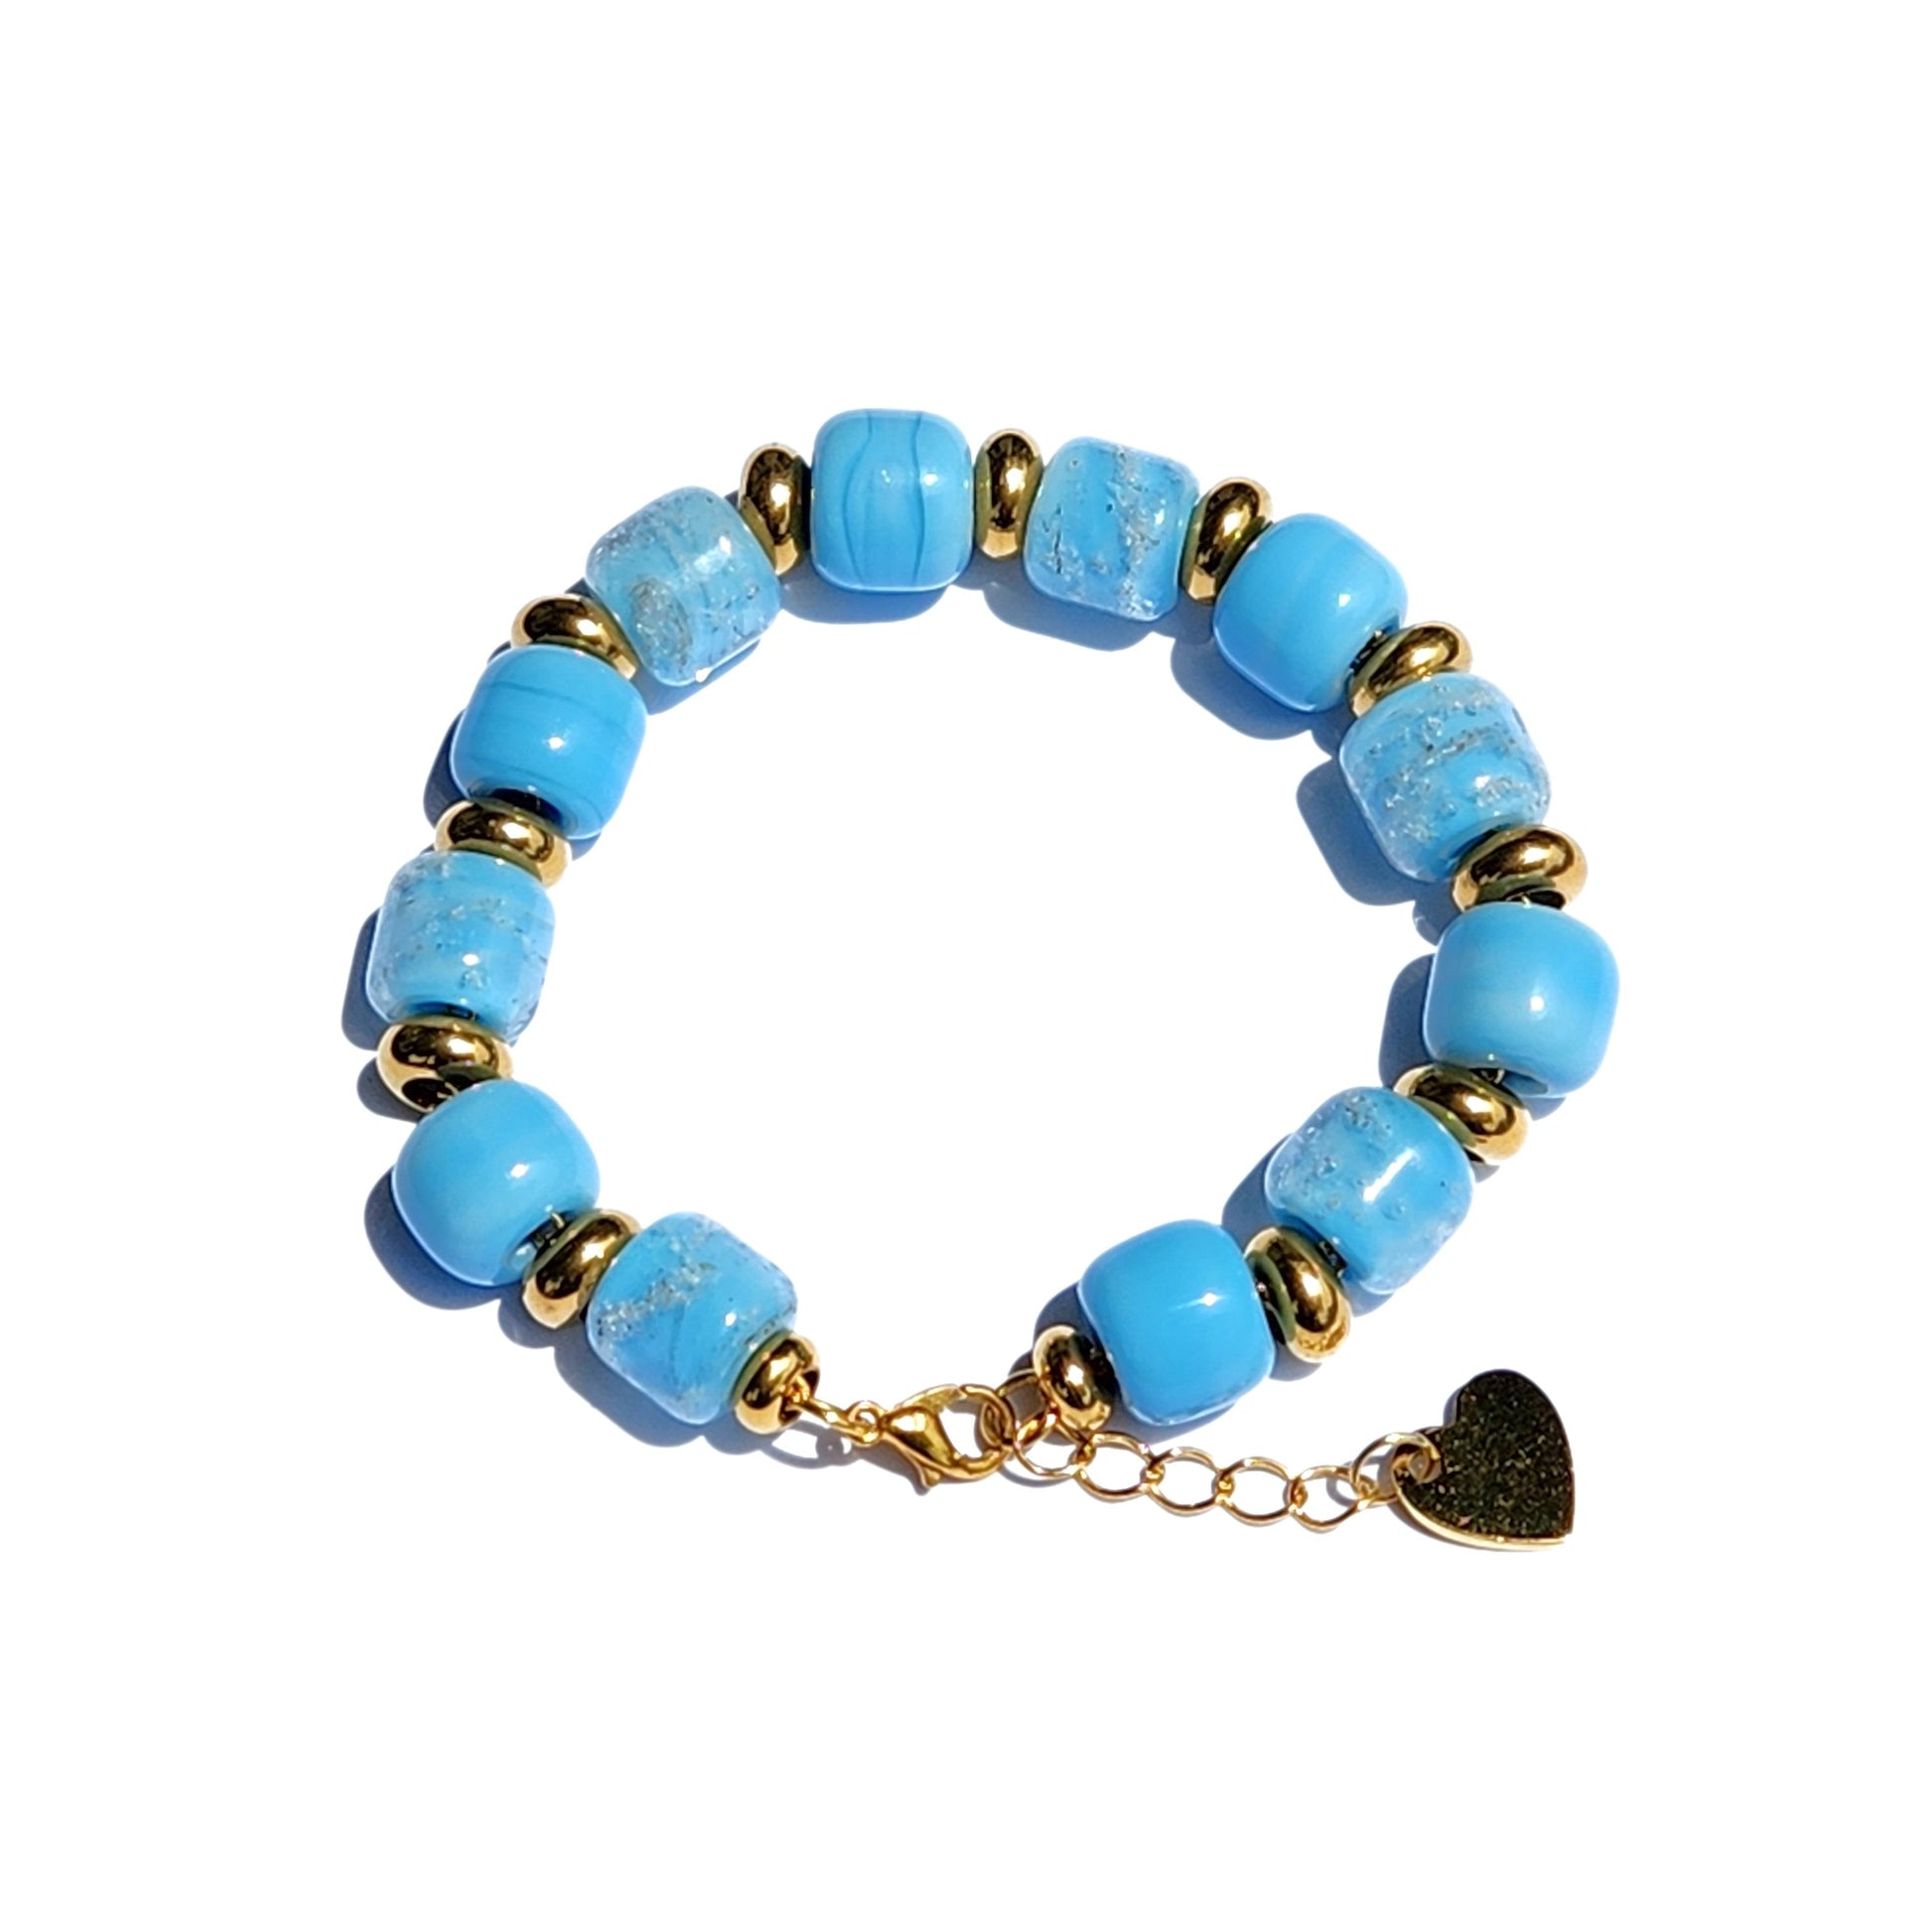 Eternal Cremation Bracelet With 6 Ash Beads - Sky Blue-Cremation Beads-DragonFire Glass-Gold-DragonFire Glass Cremation Jewelry